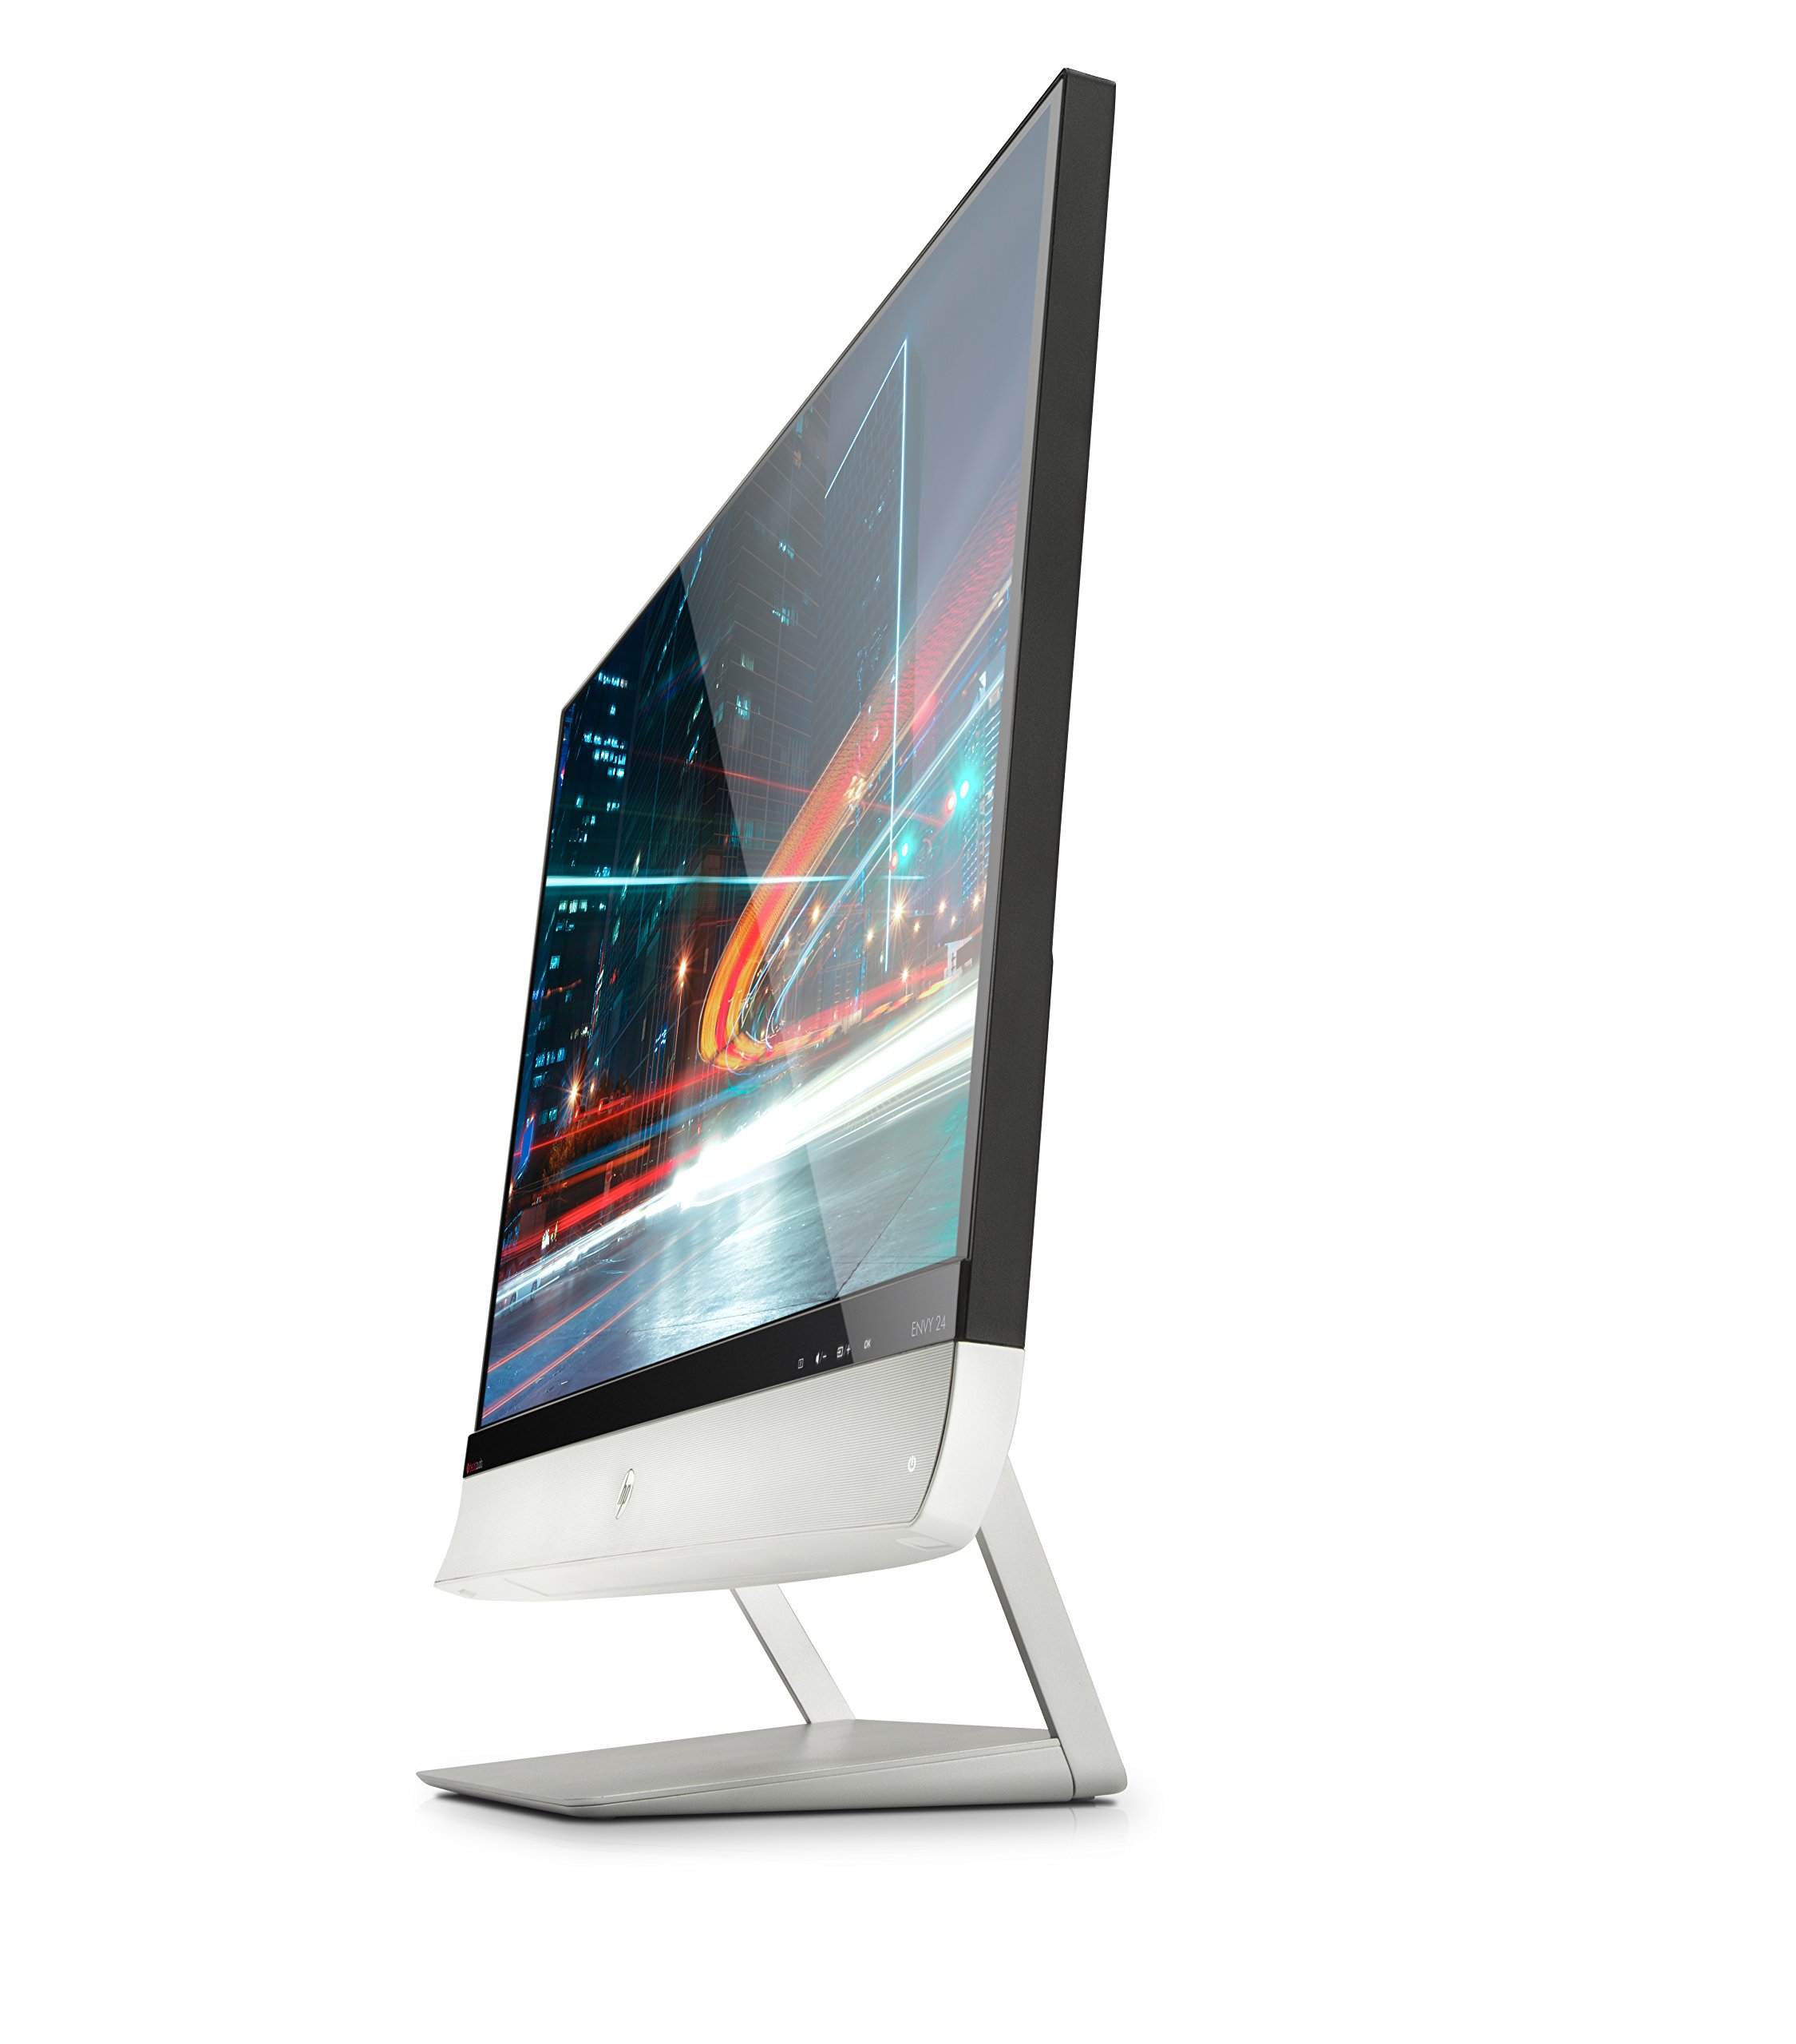 ENVY 23 23-inch IPS LED Backlit Monitor with Beats Audio